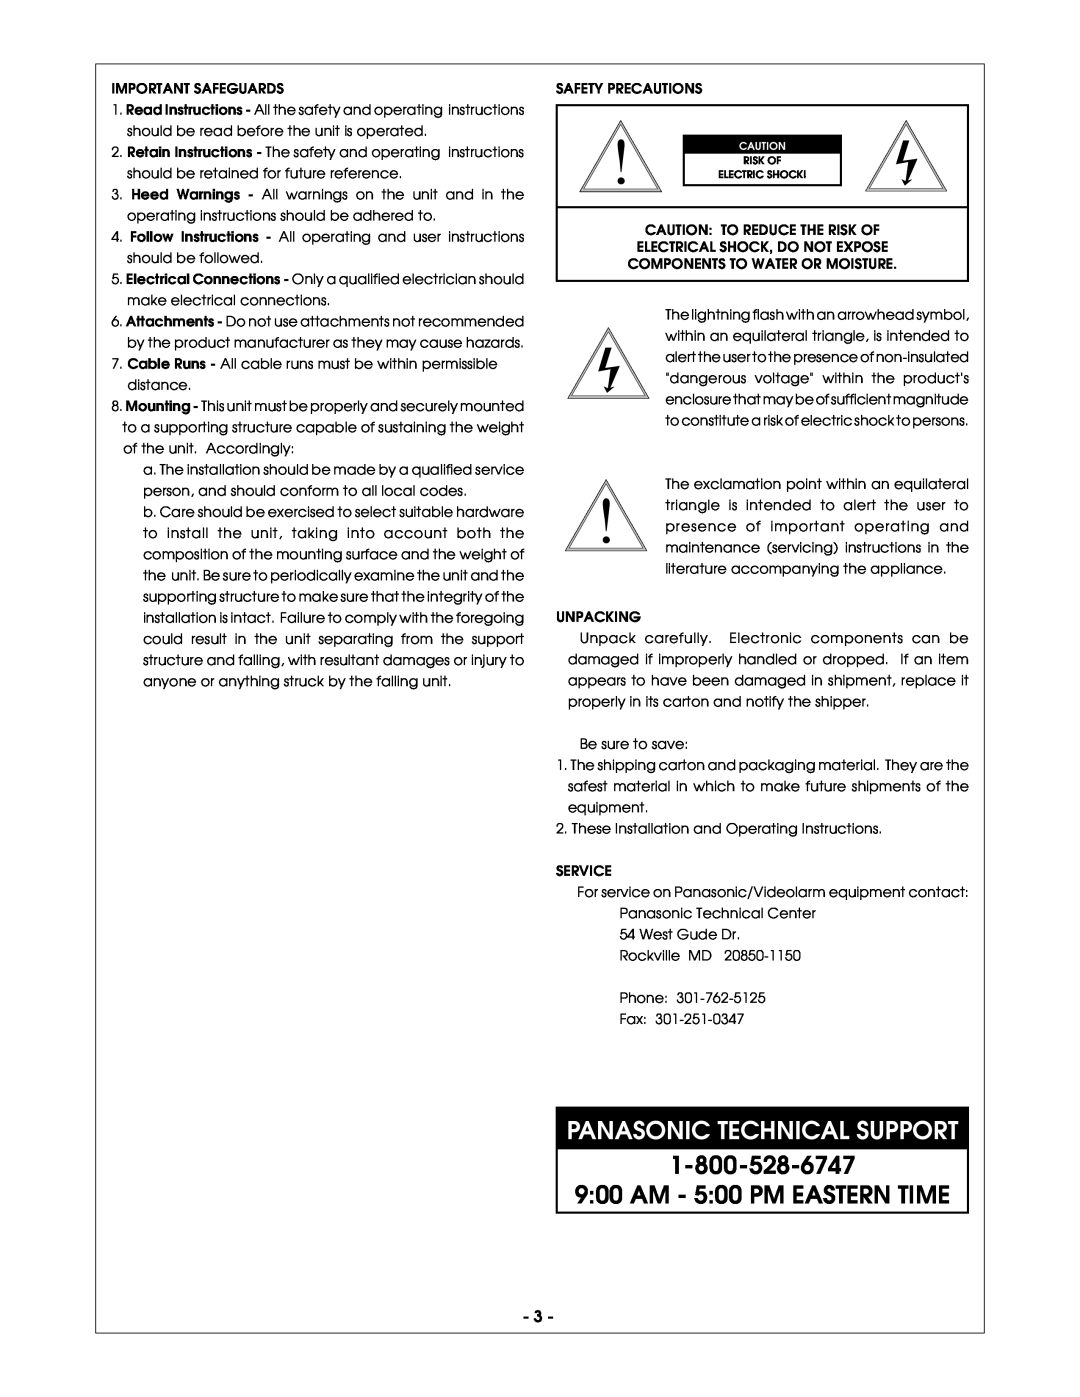 Panasonic PCF5, PCV5 manual Panasonic Technical Support, AM - 500 PM EASTERN TIME 